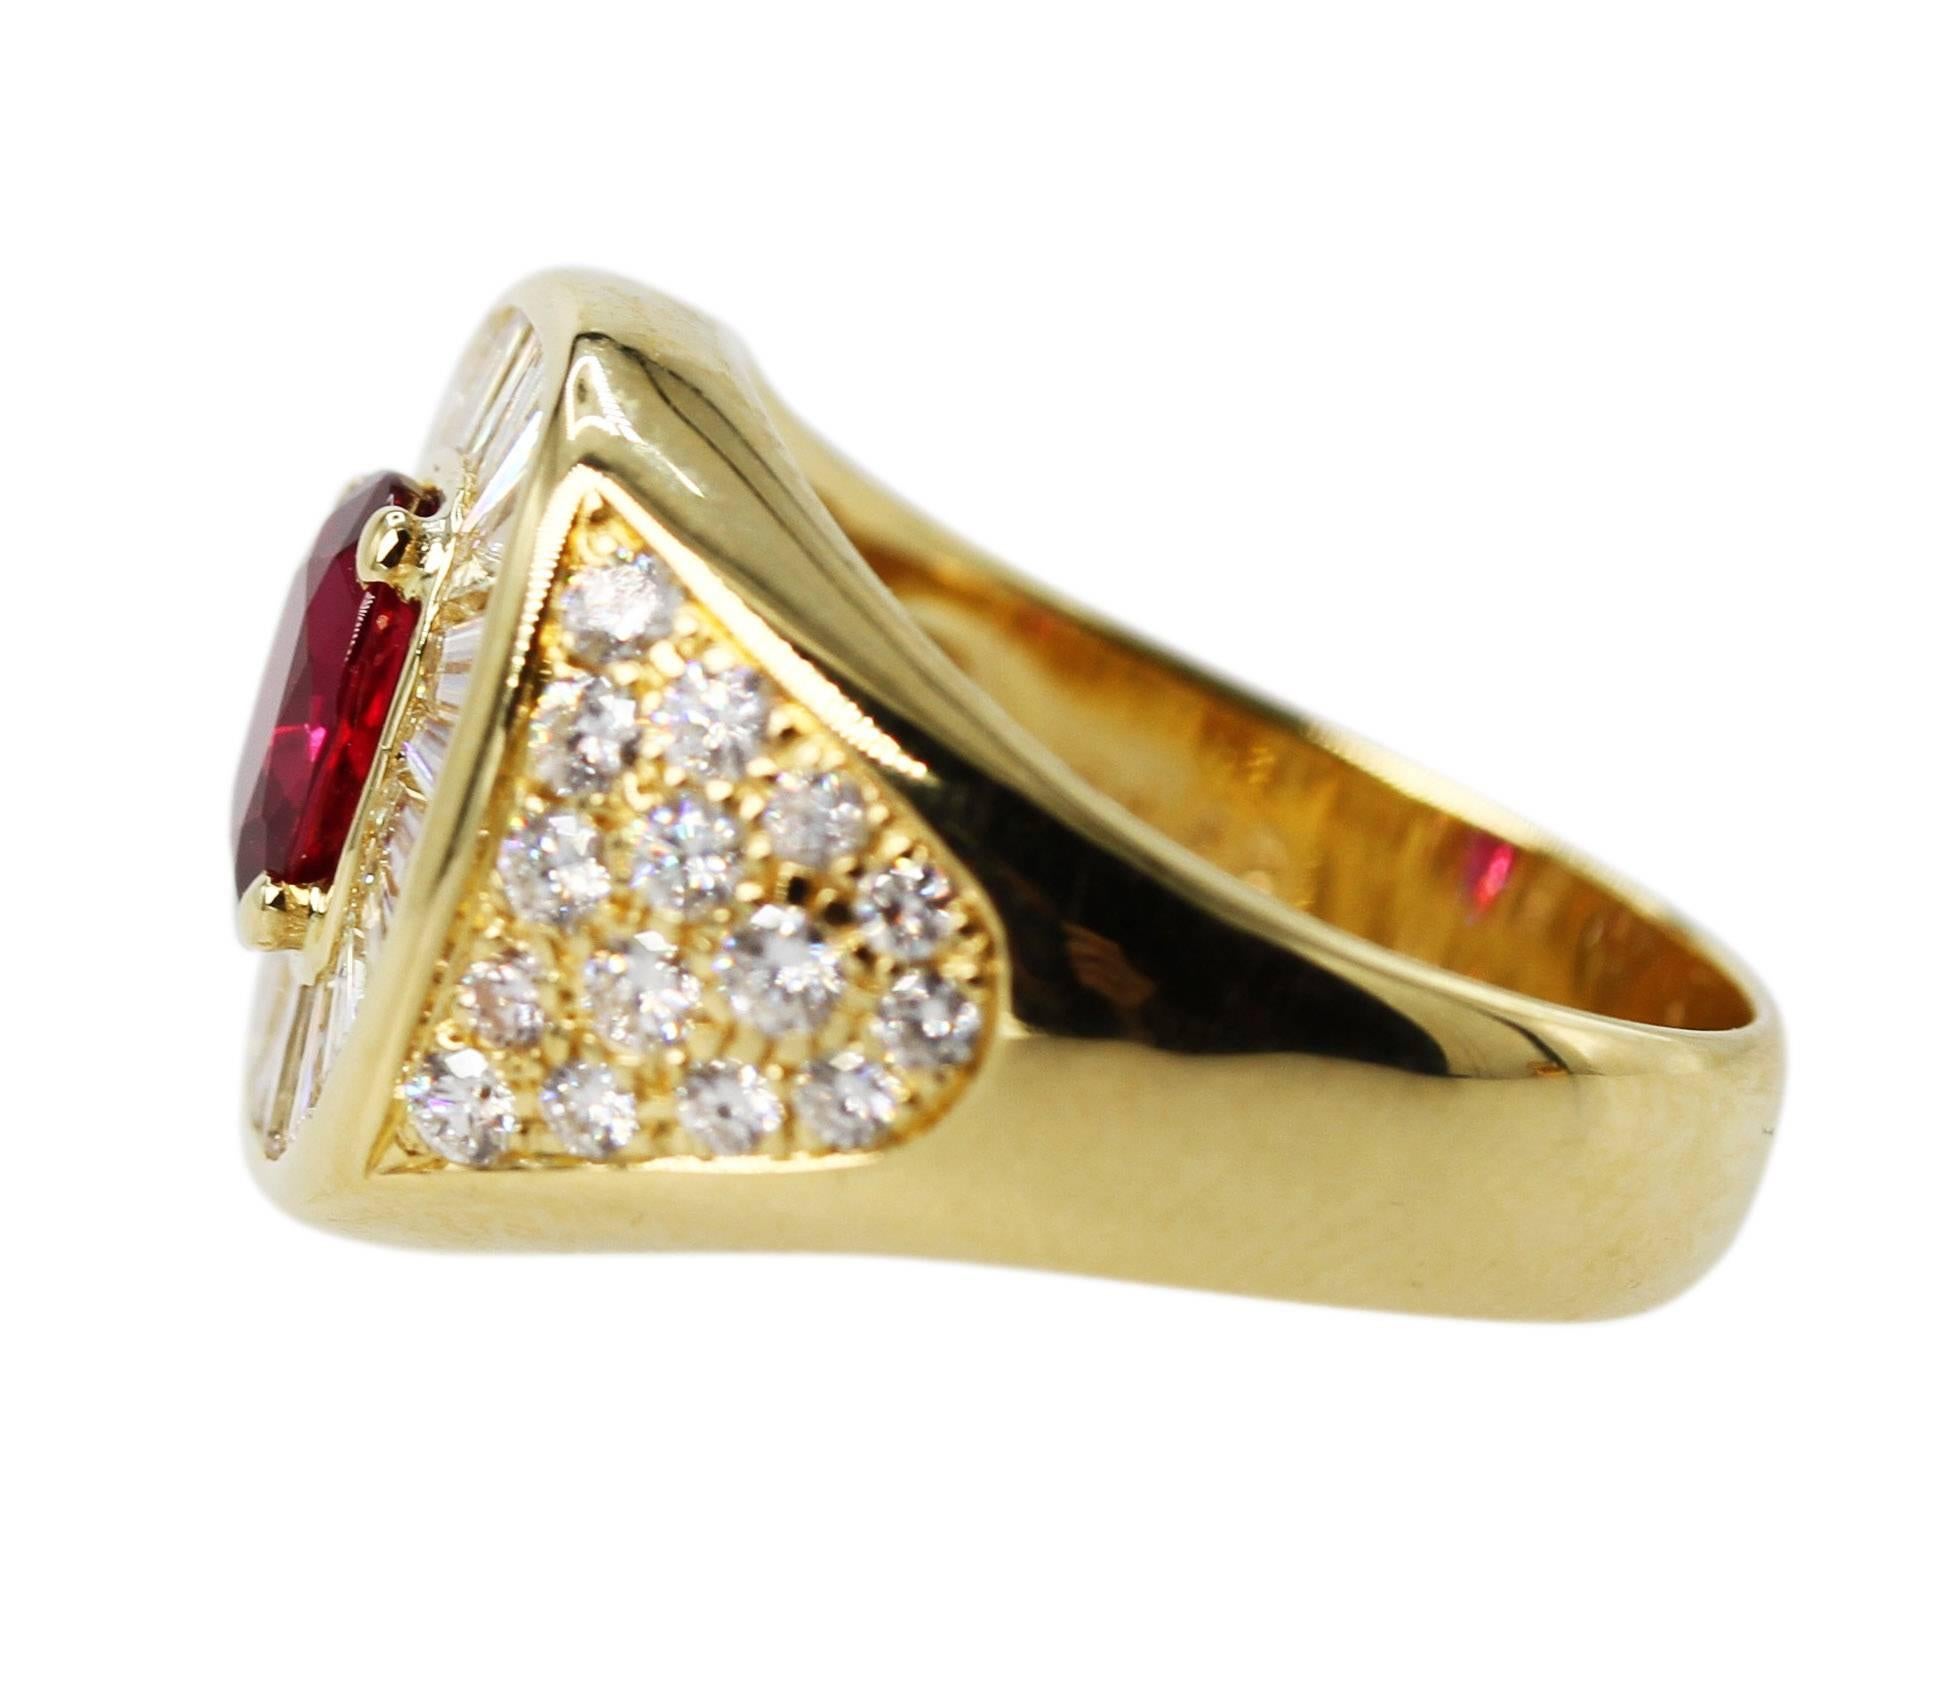 18 Karat Yellow Gold, Ruby Diamond Ring
• Stamped 750, 1.20ct, D1.85, 318AL
• Oval ruby approximately 1.20 carats
• 24 baguette and 30 round diamonds approximately 1.85 carats
• Size 7, gross weight 10.3 grams
The ruby is natural and of exceptional